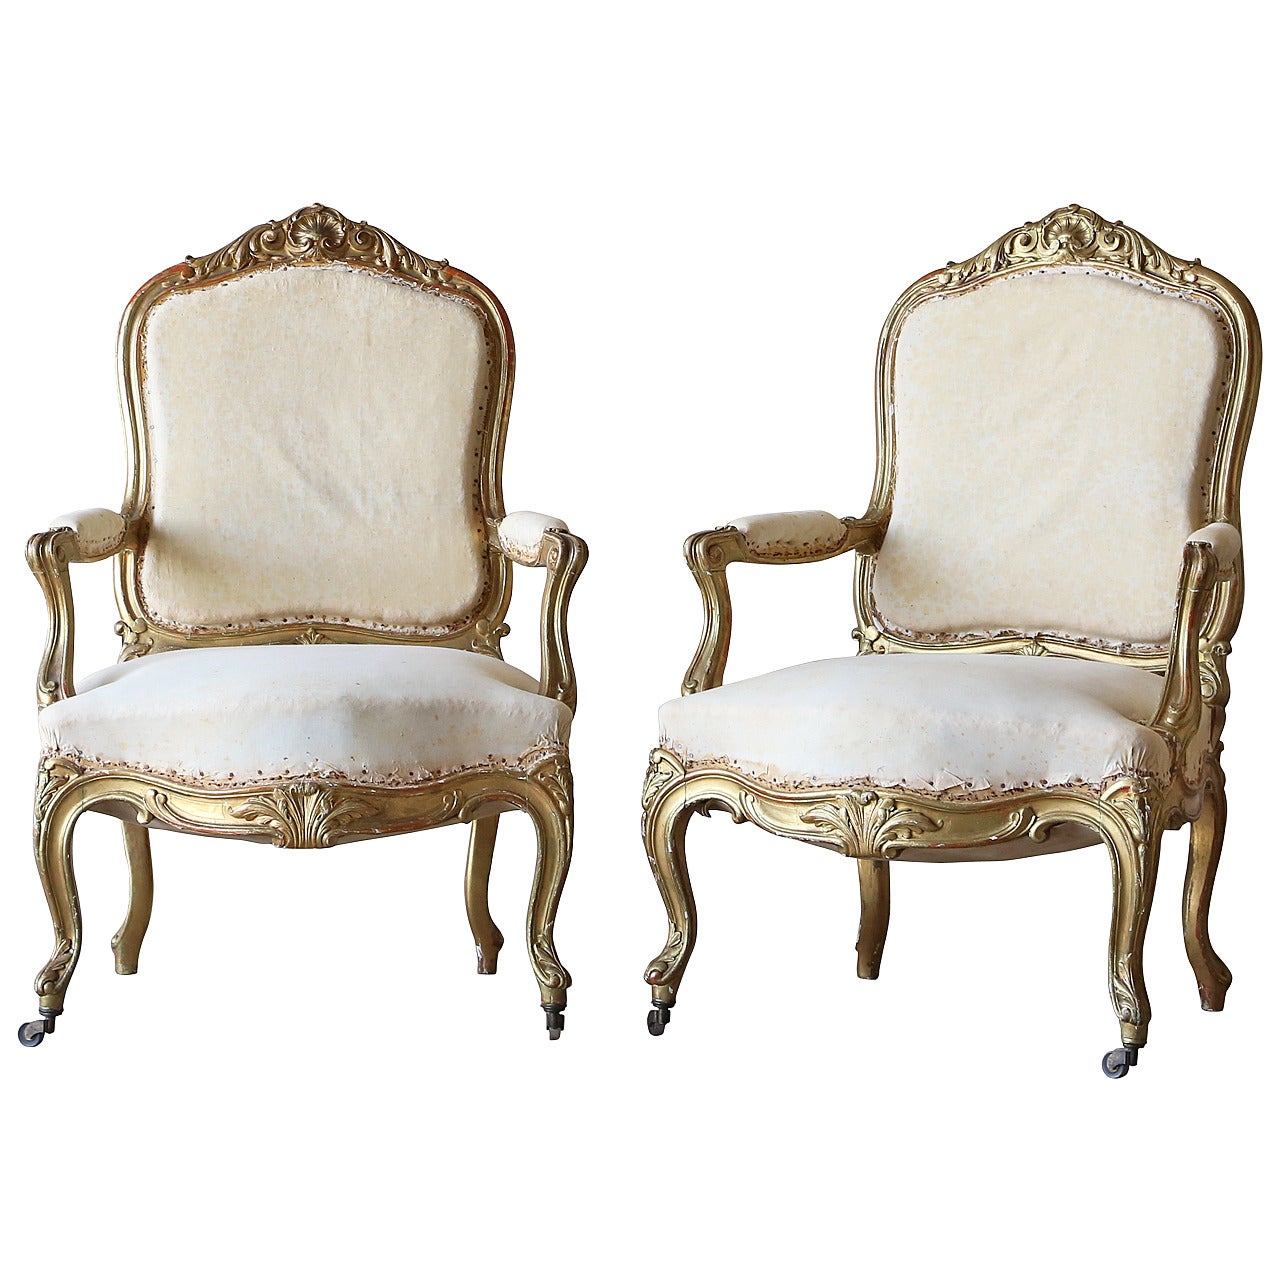 Antique French Armchairs, circa 1880